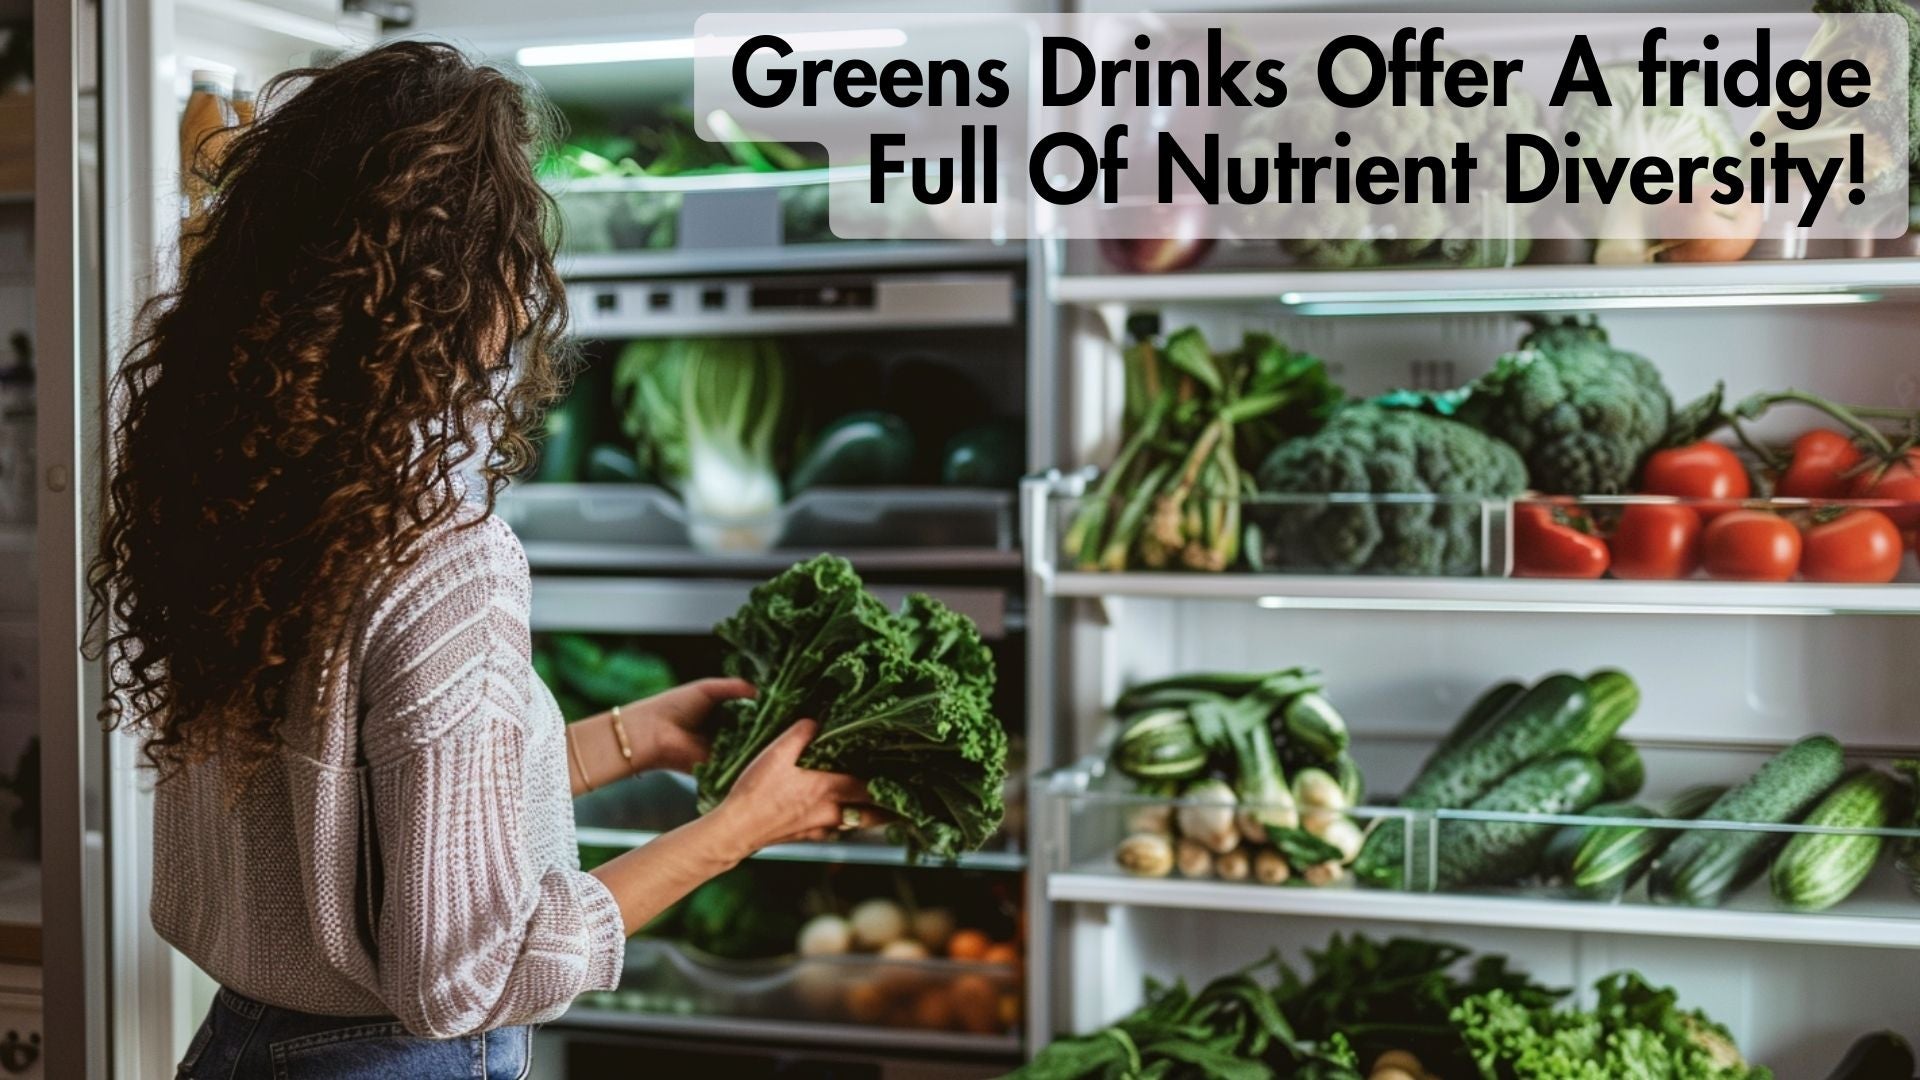 Greens Drink supplements vitamins and minerals